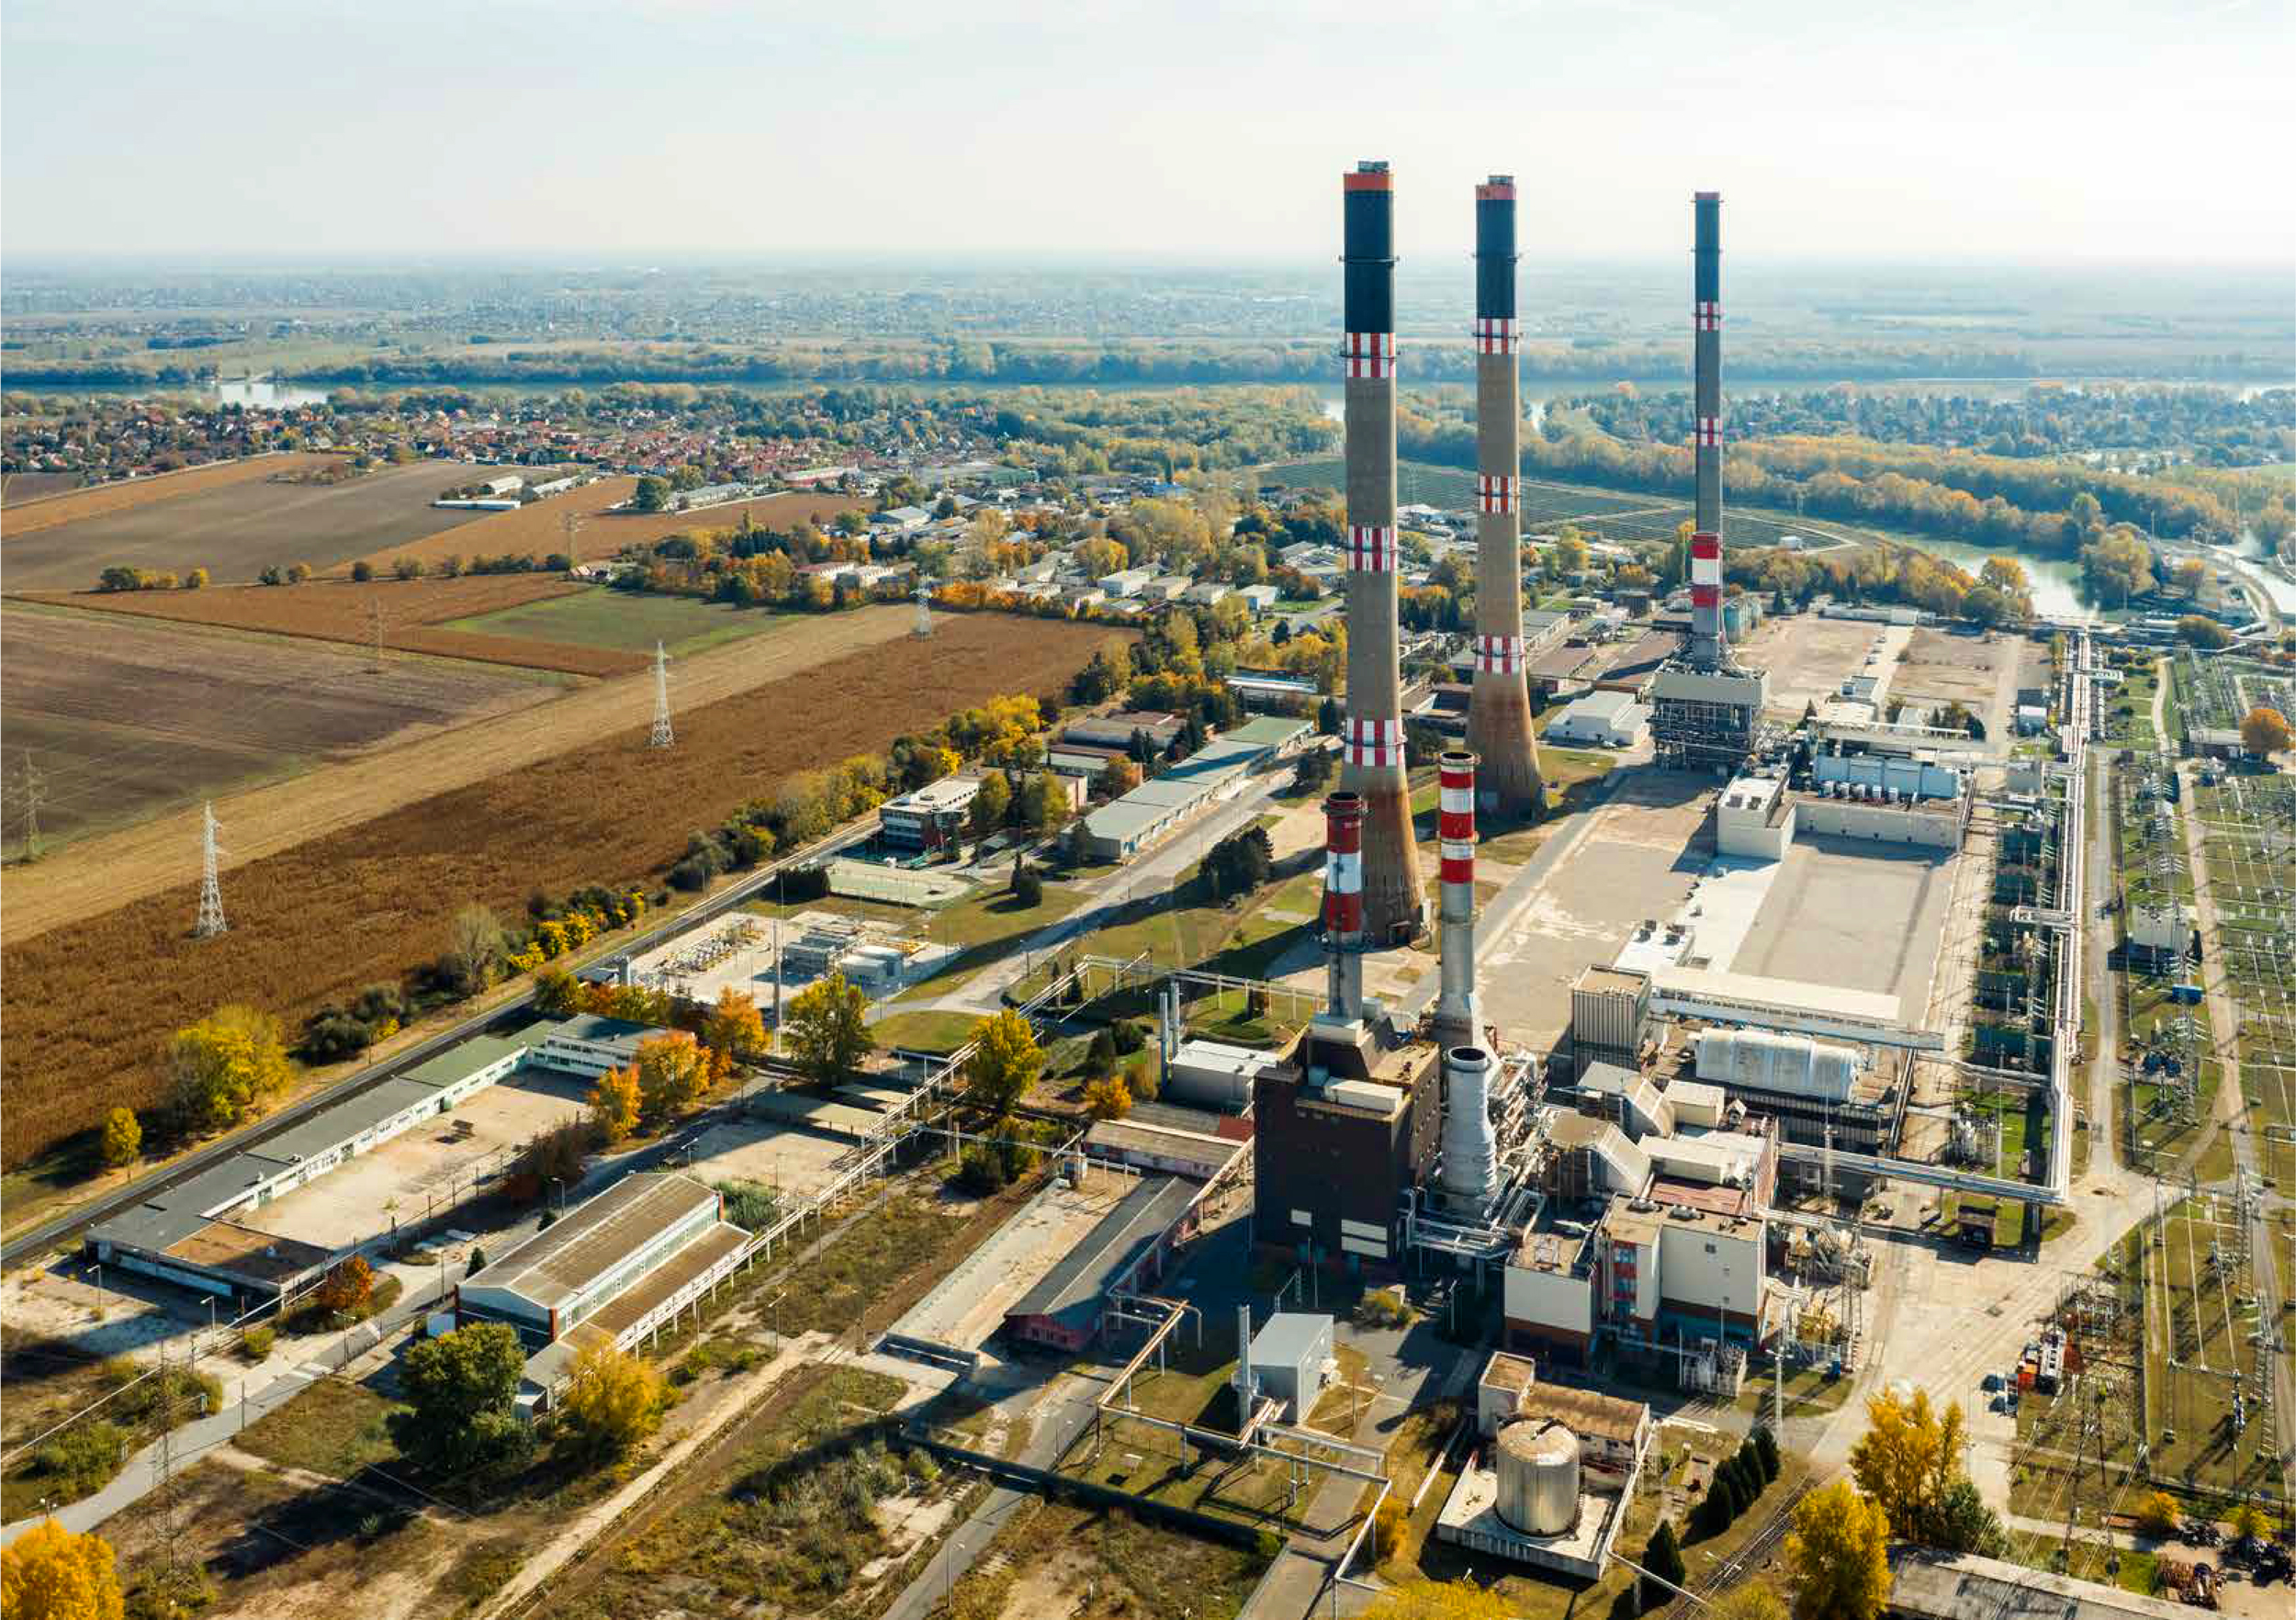 PARAT Halvorsen to deliver 30MW Electrode Boiler to Dunamenti Erőmű in Hungary